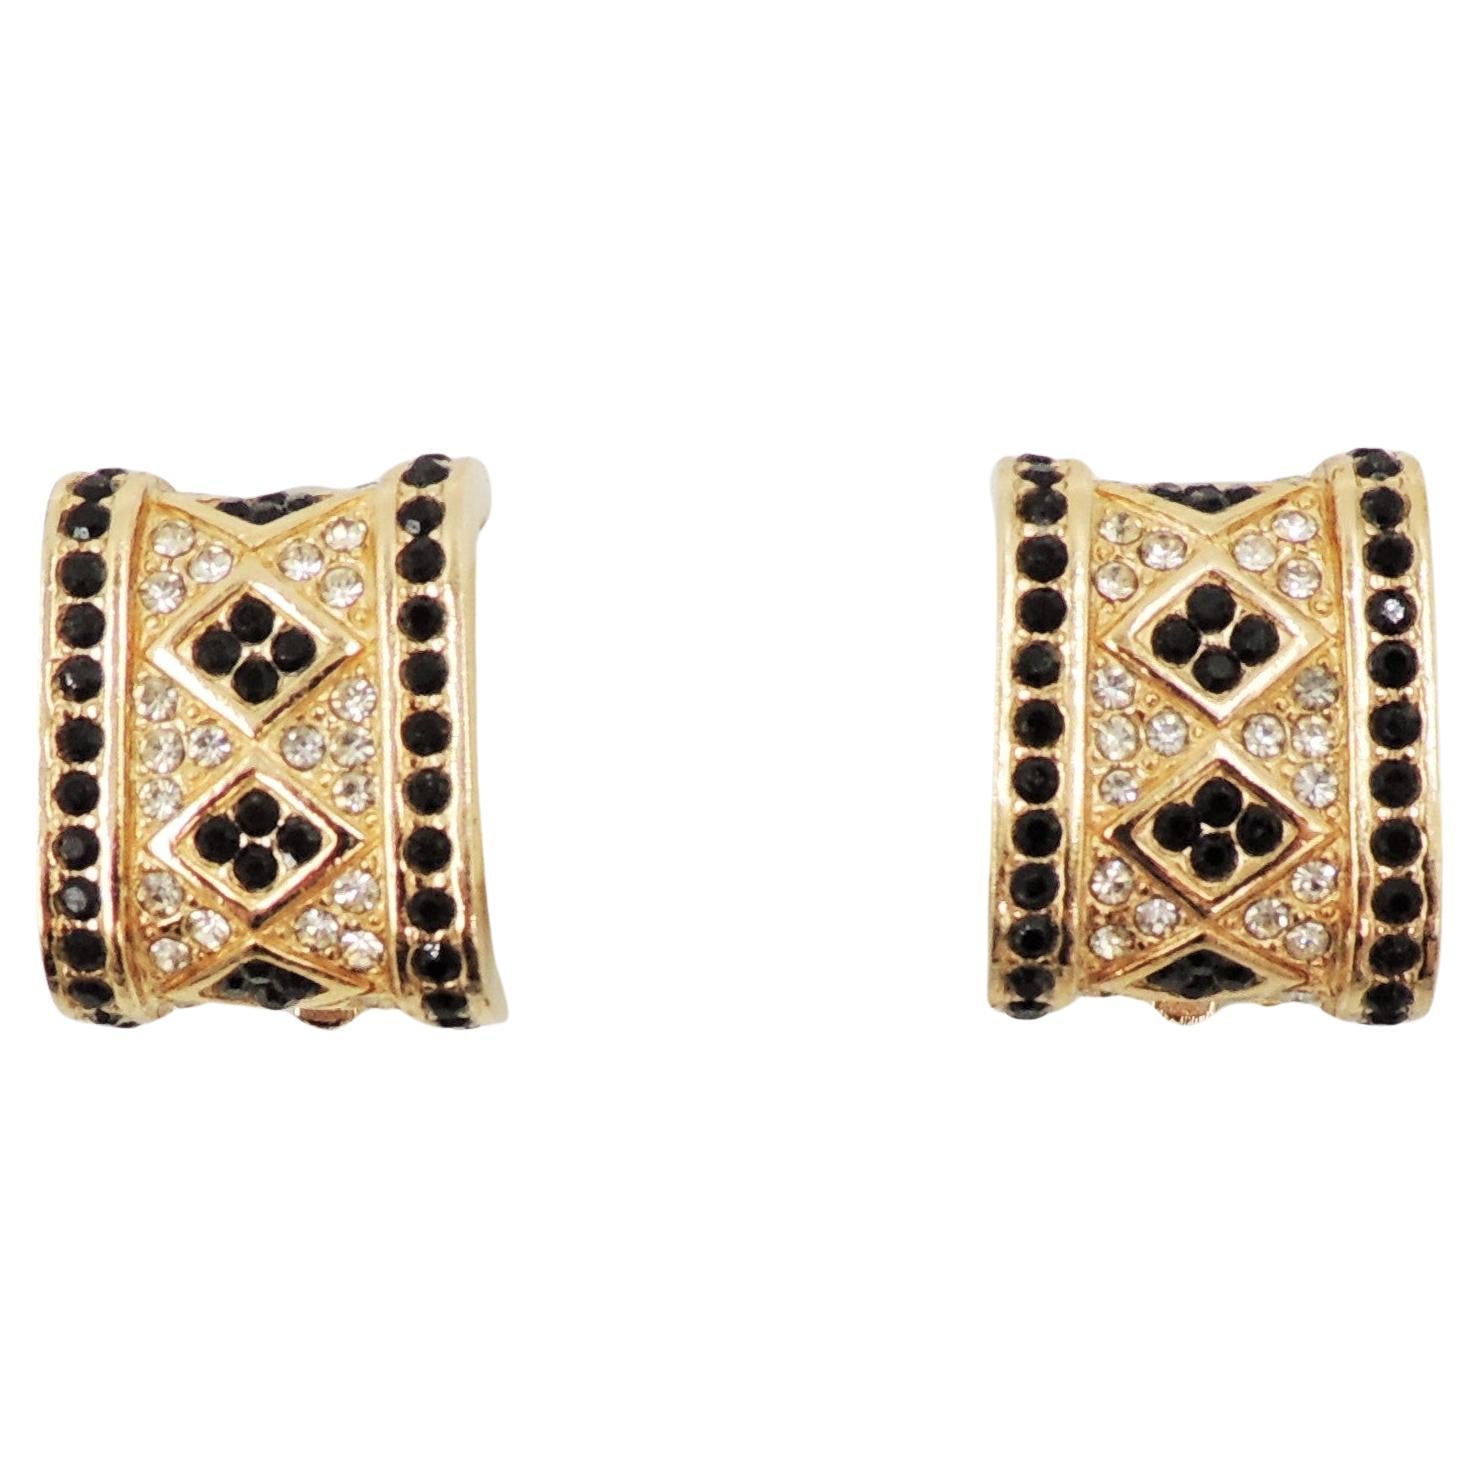 Vintage 1980s Signed Ciner Goldtone Faux-Onyx & Clear Rhinestone Earrings For Sale